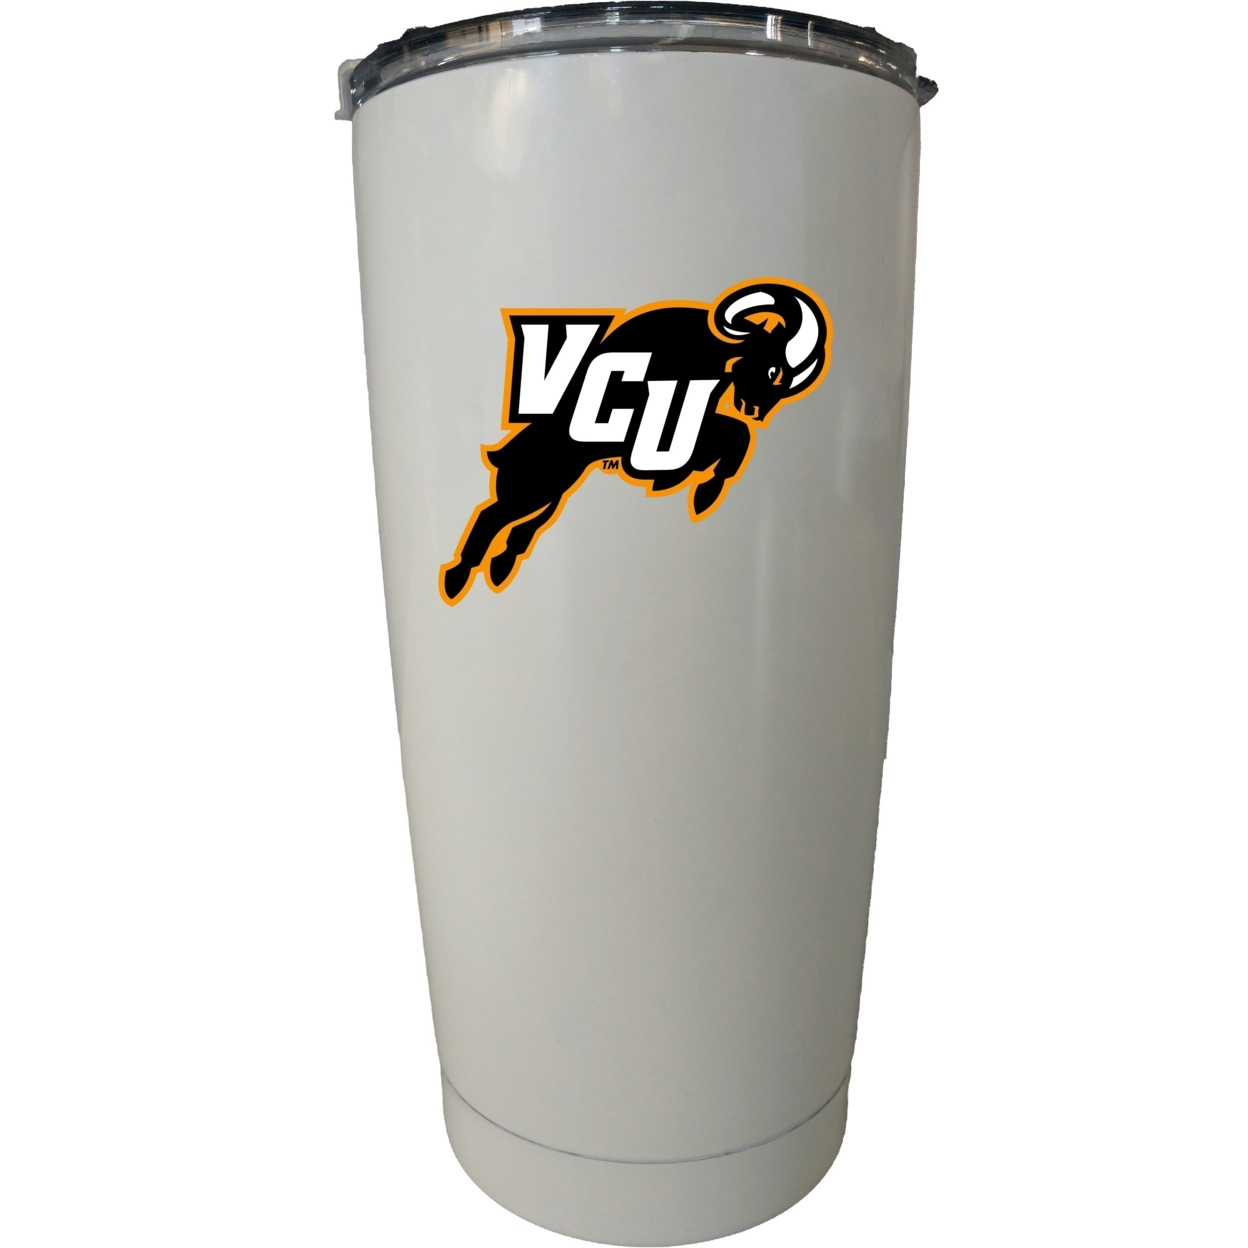 Virginia Commonwealth 16 Oz Insulated Stainless Steel Tumblers Choose Your Color. - White